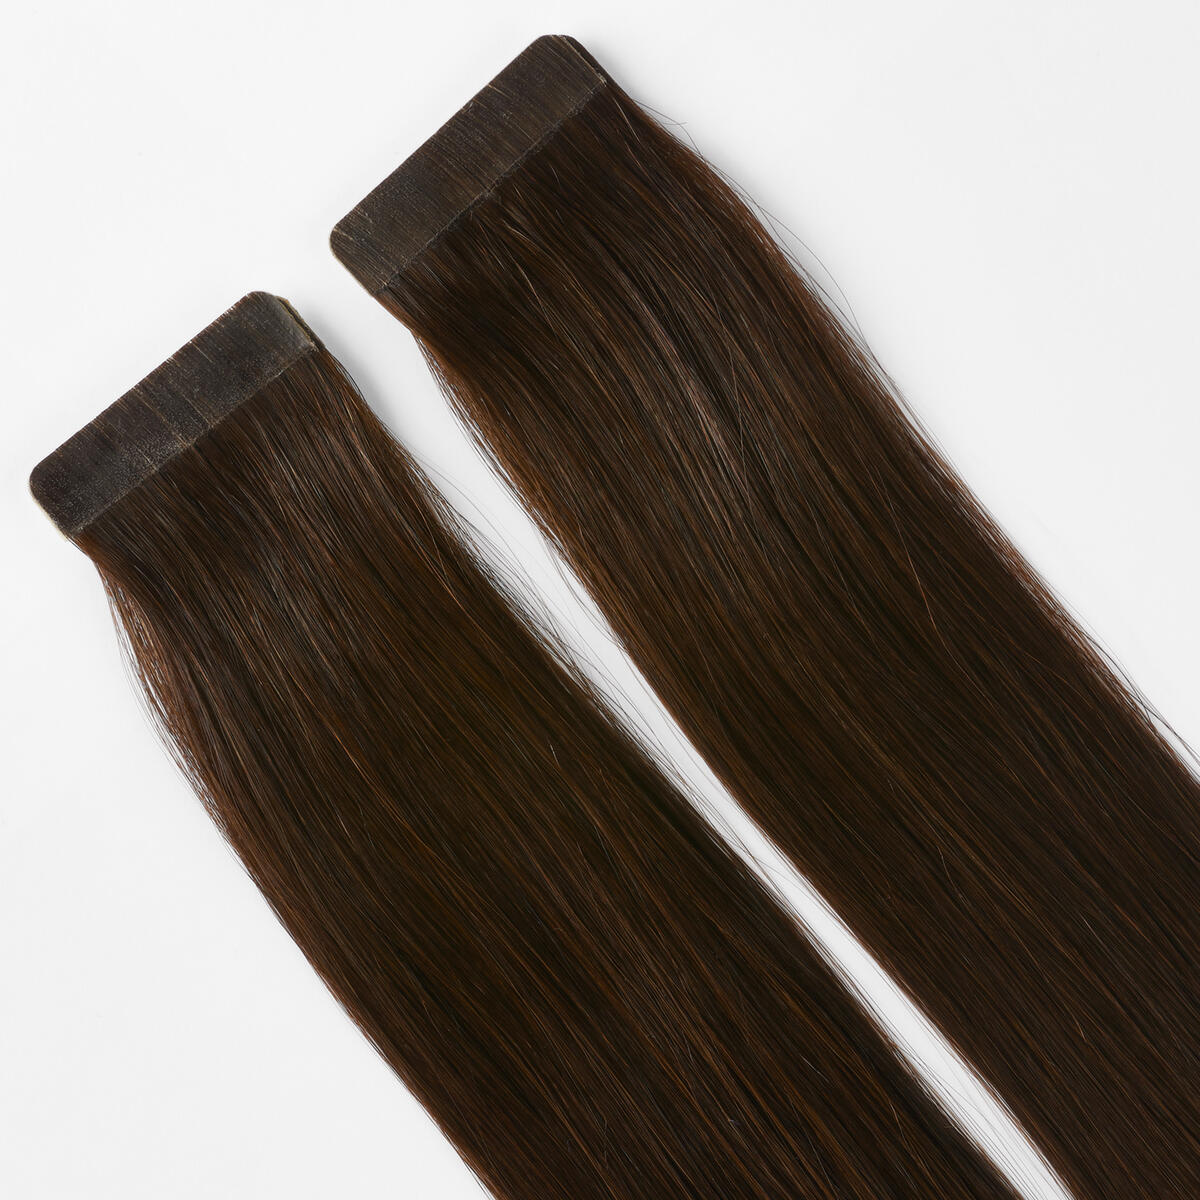 Basic Tape Extensions Classic 4 2.3 Chocolate Brown 50 cm